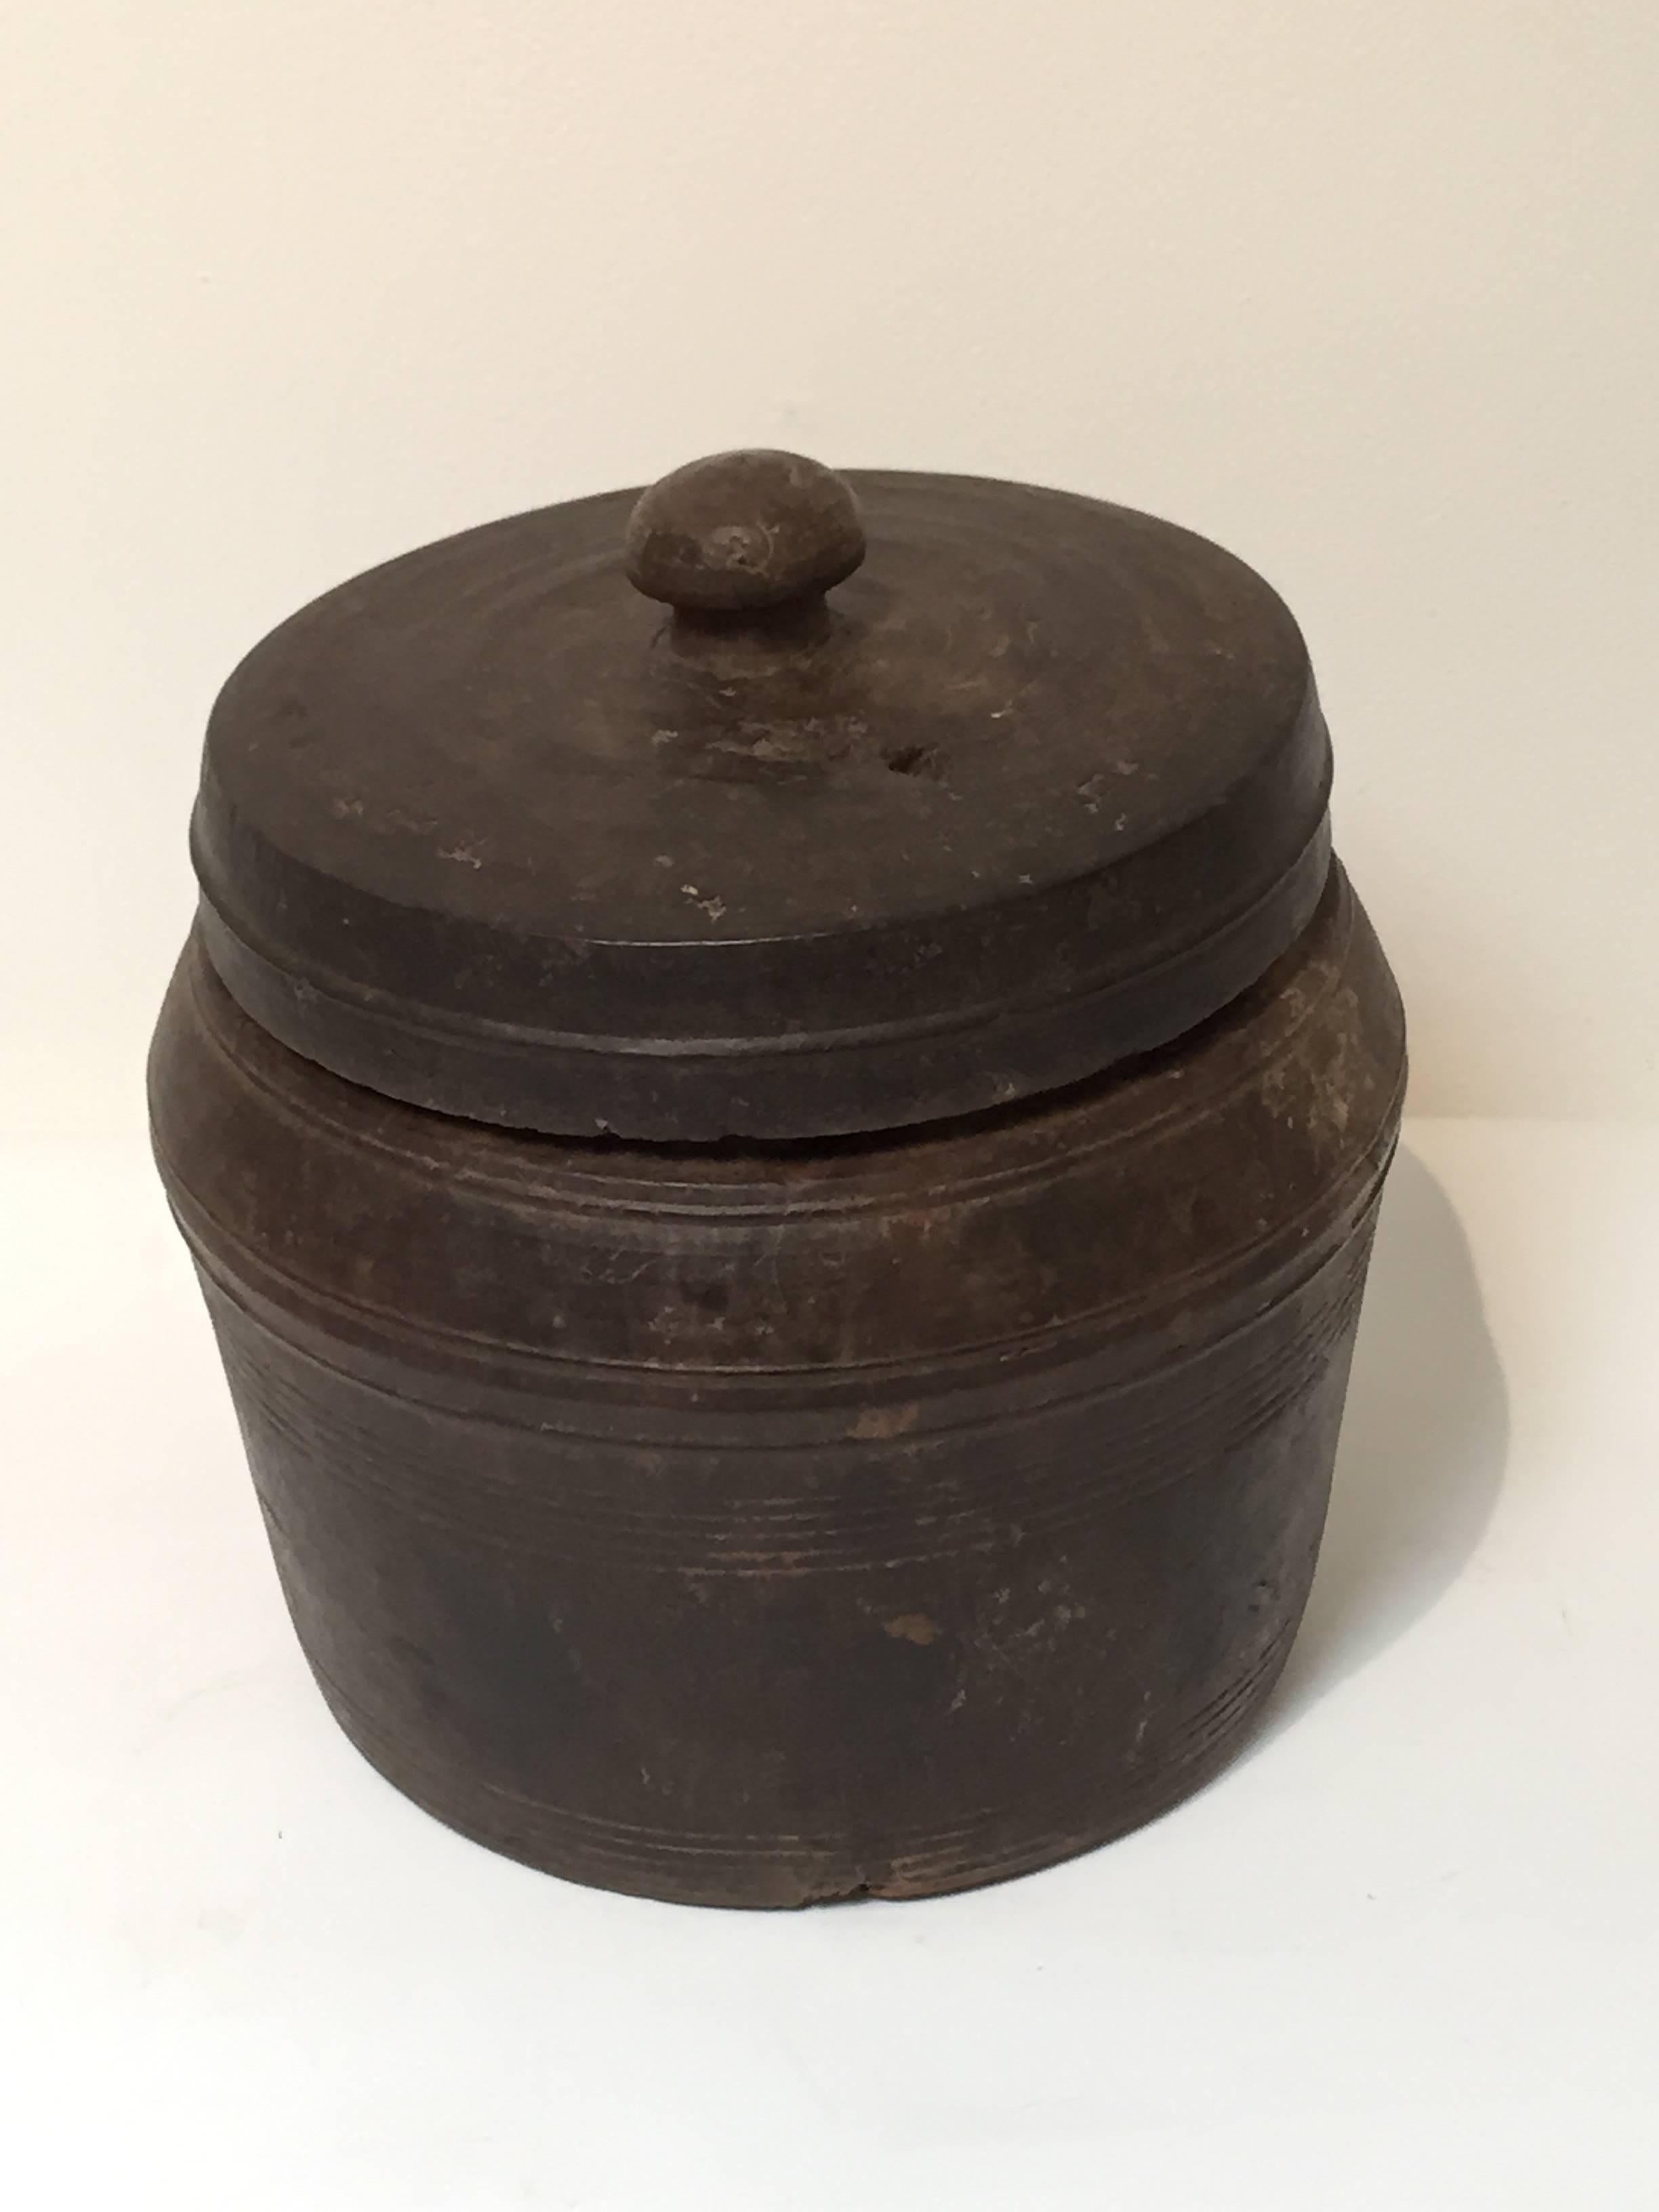 A set of three 19th century Tibetan wooden containers. Two of the pieces with lids.
Likely old food storage containers.
Measures: 12